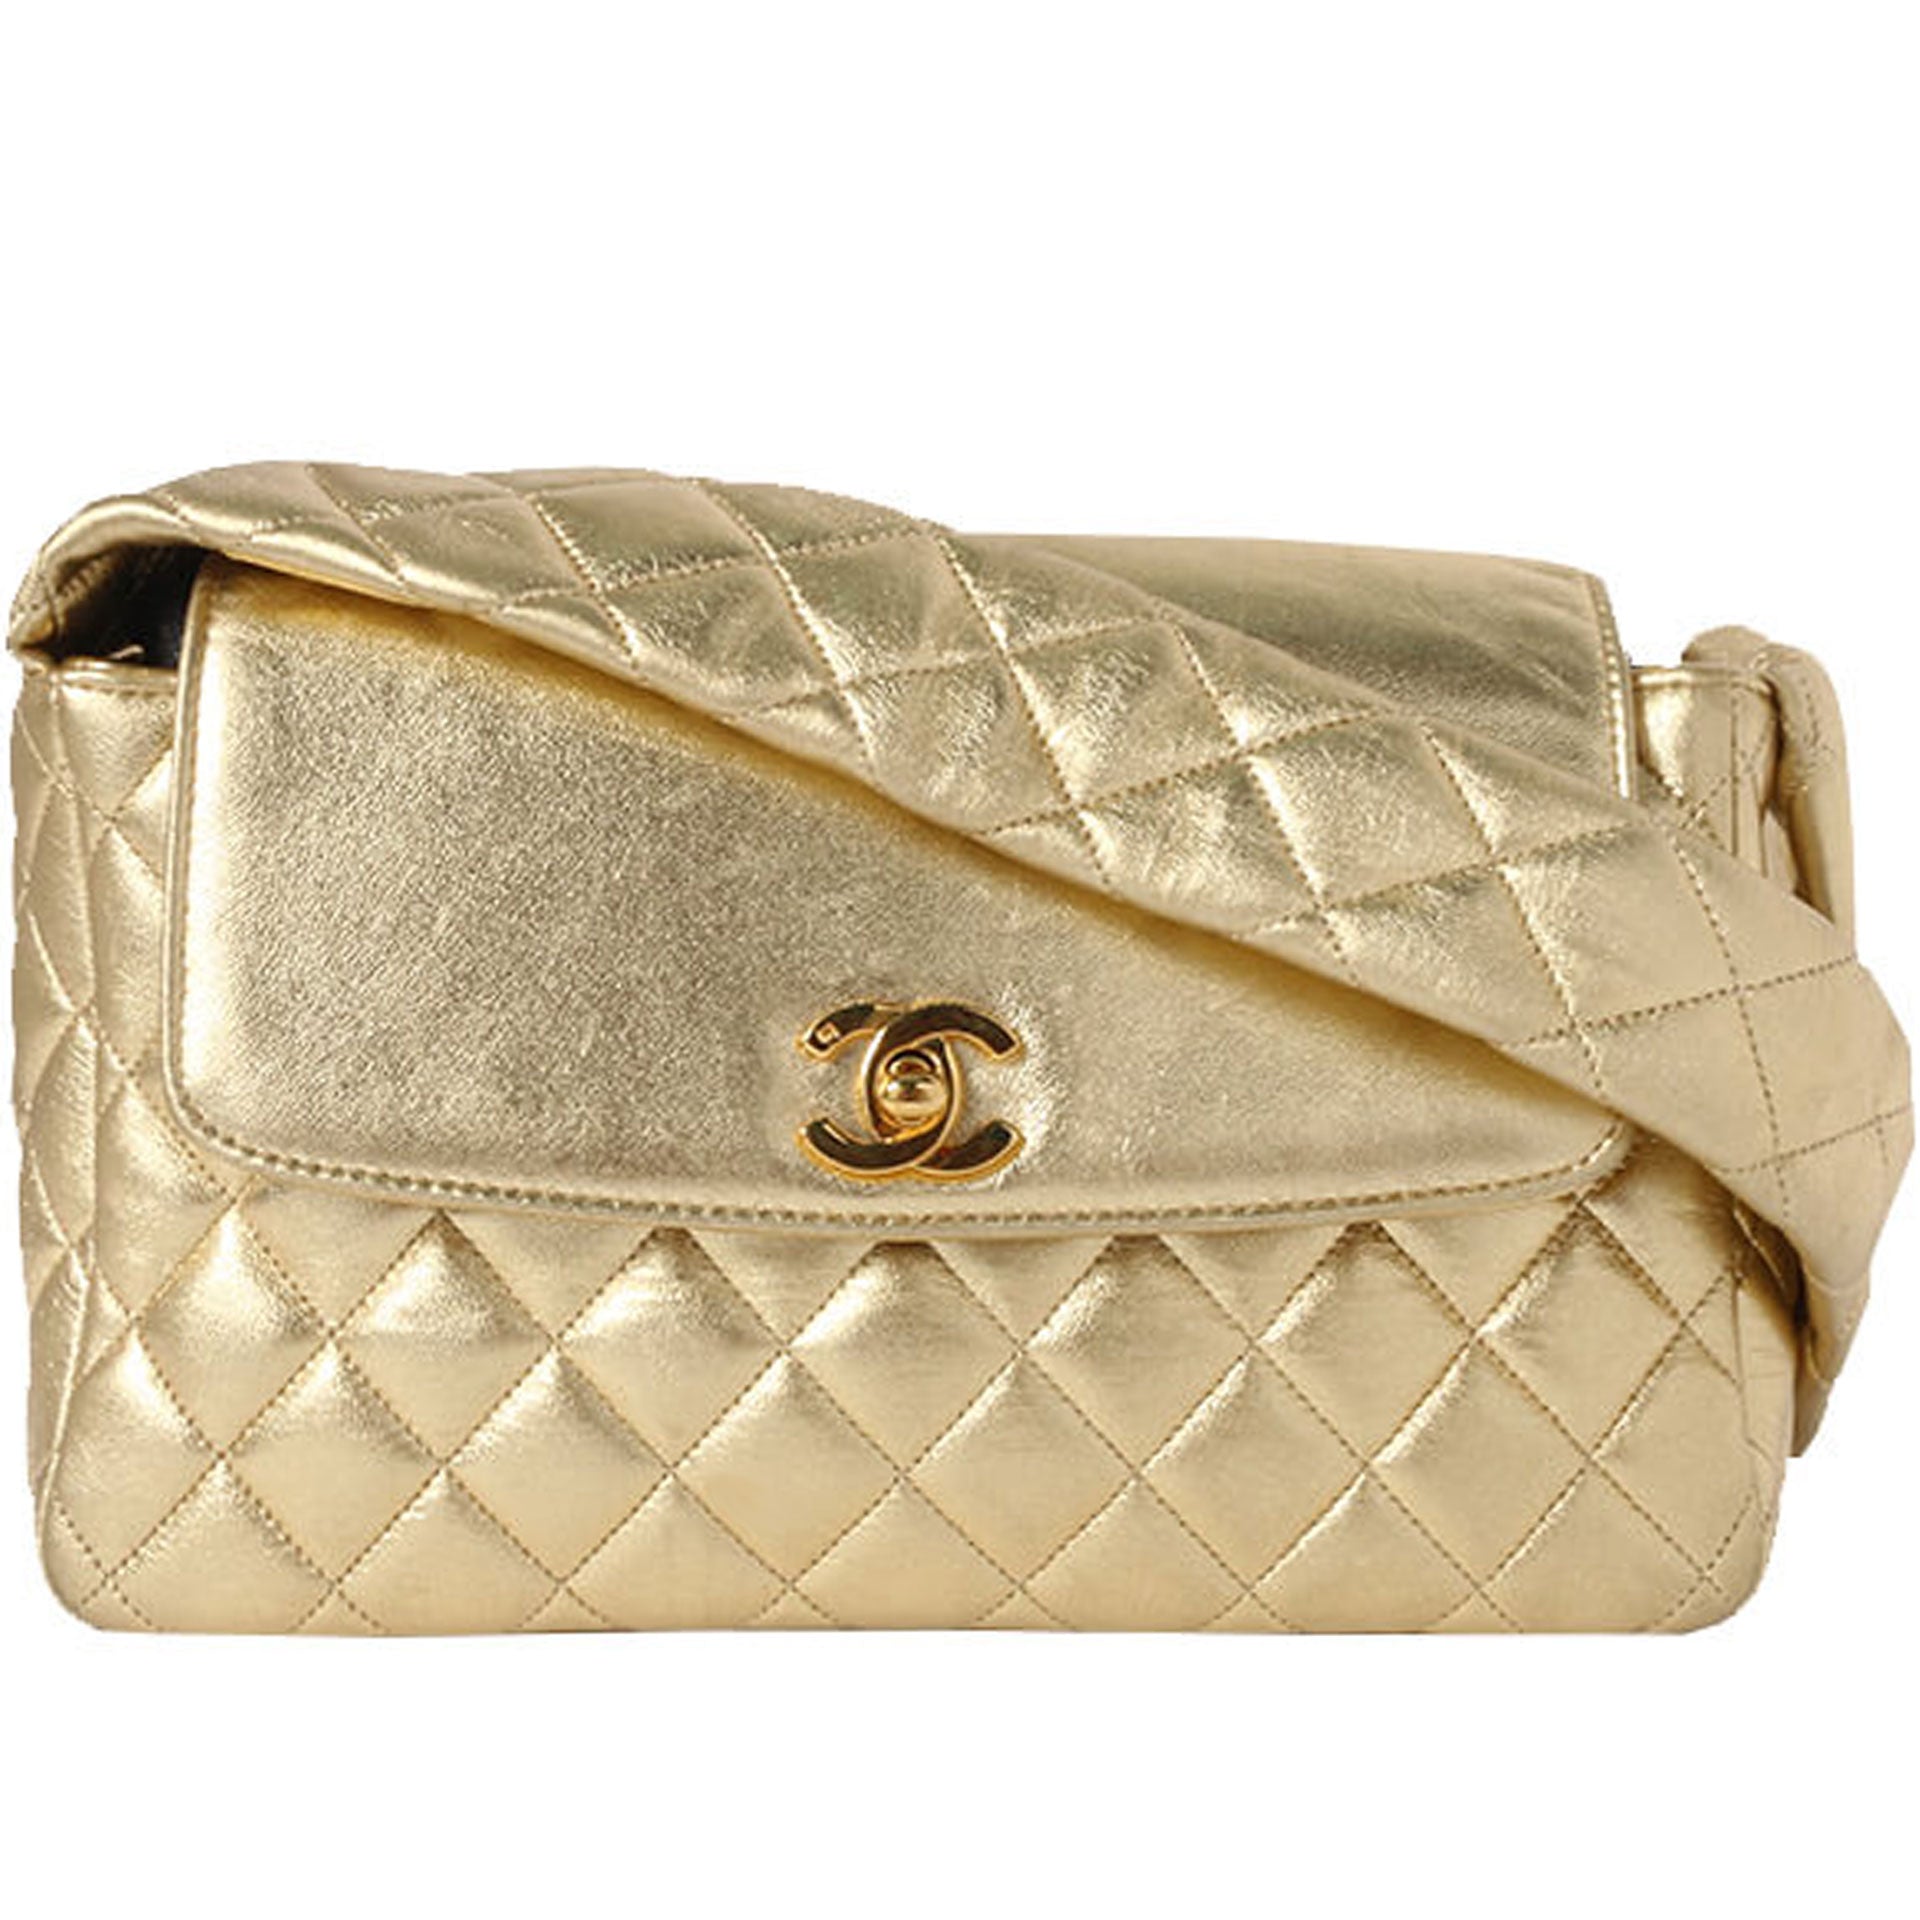 Chanel 90's Rare Gold Quilted Metallic Lambskin Flap